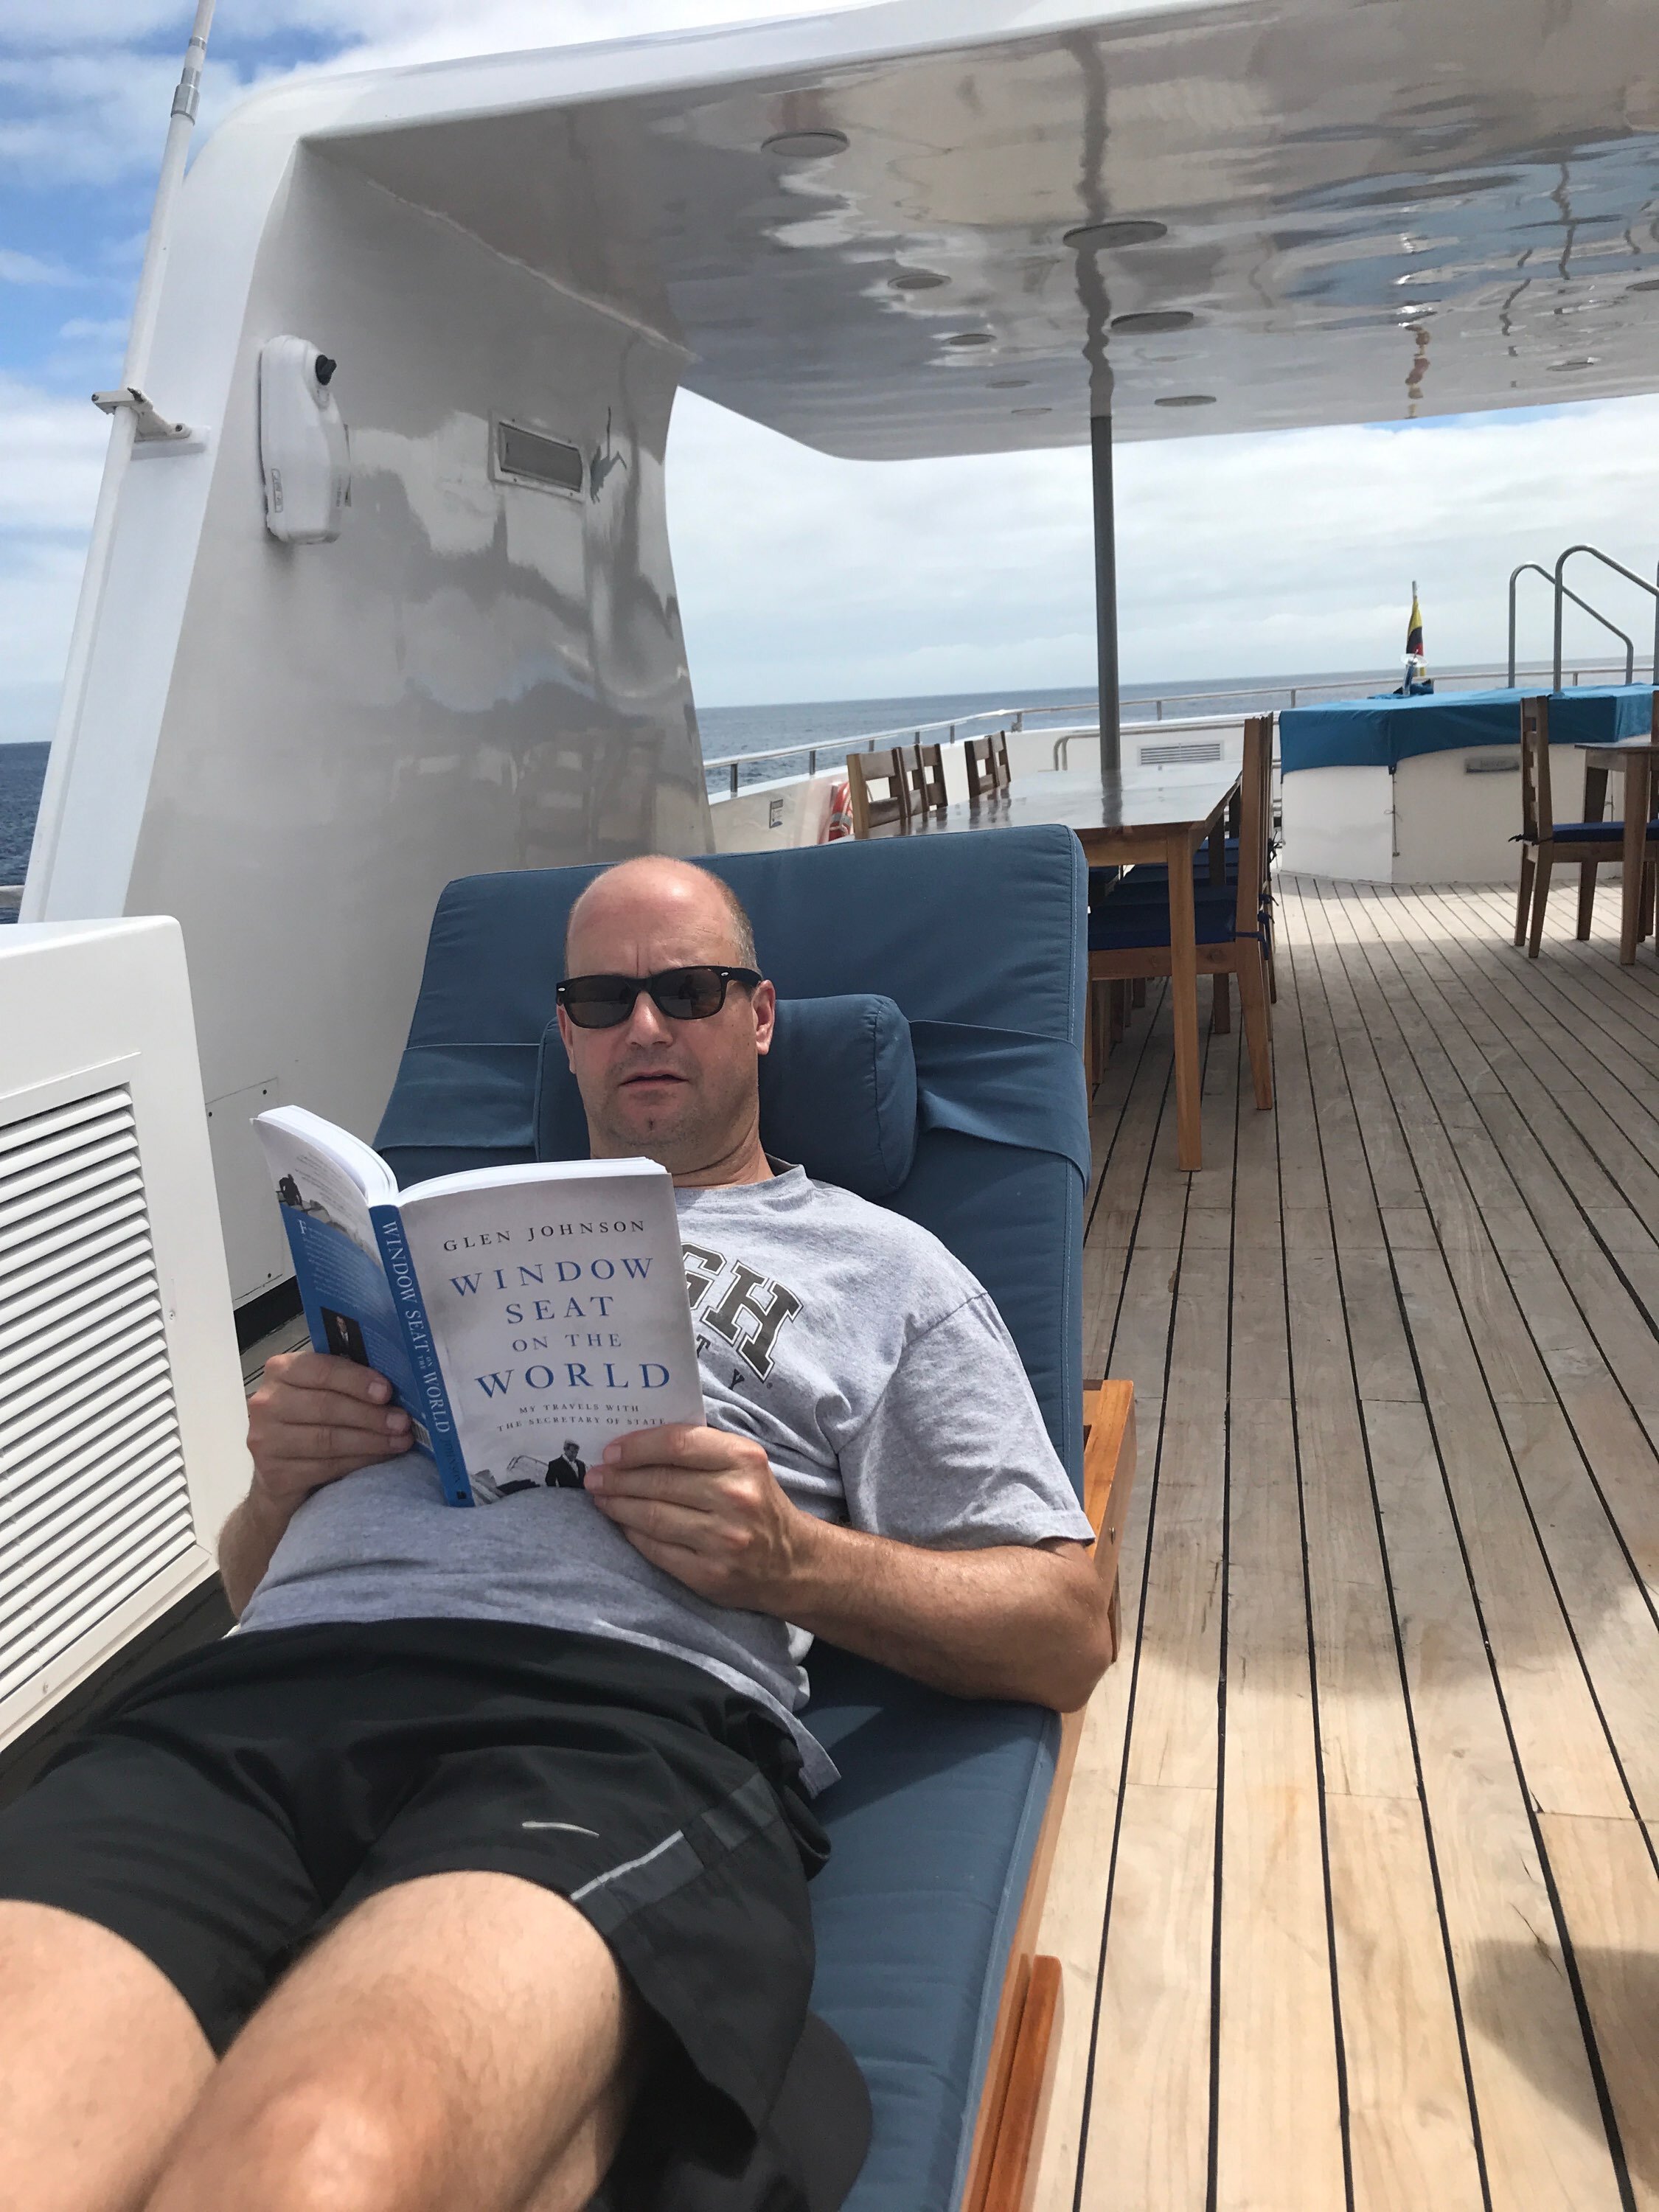  My college buddy Chris Coogan reading the book on a boat off the Galapagos Islands. 